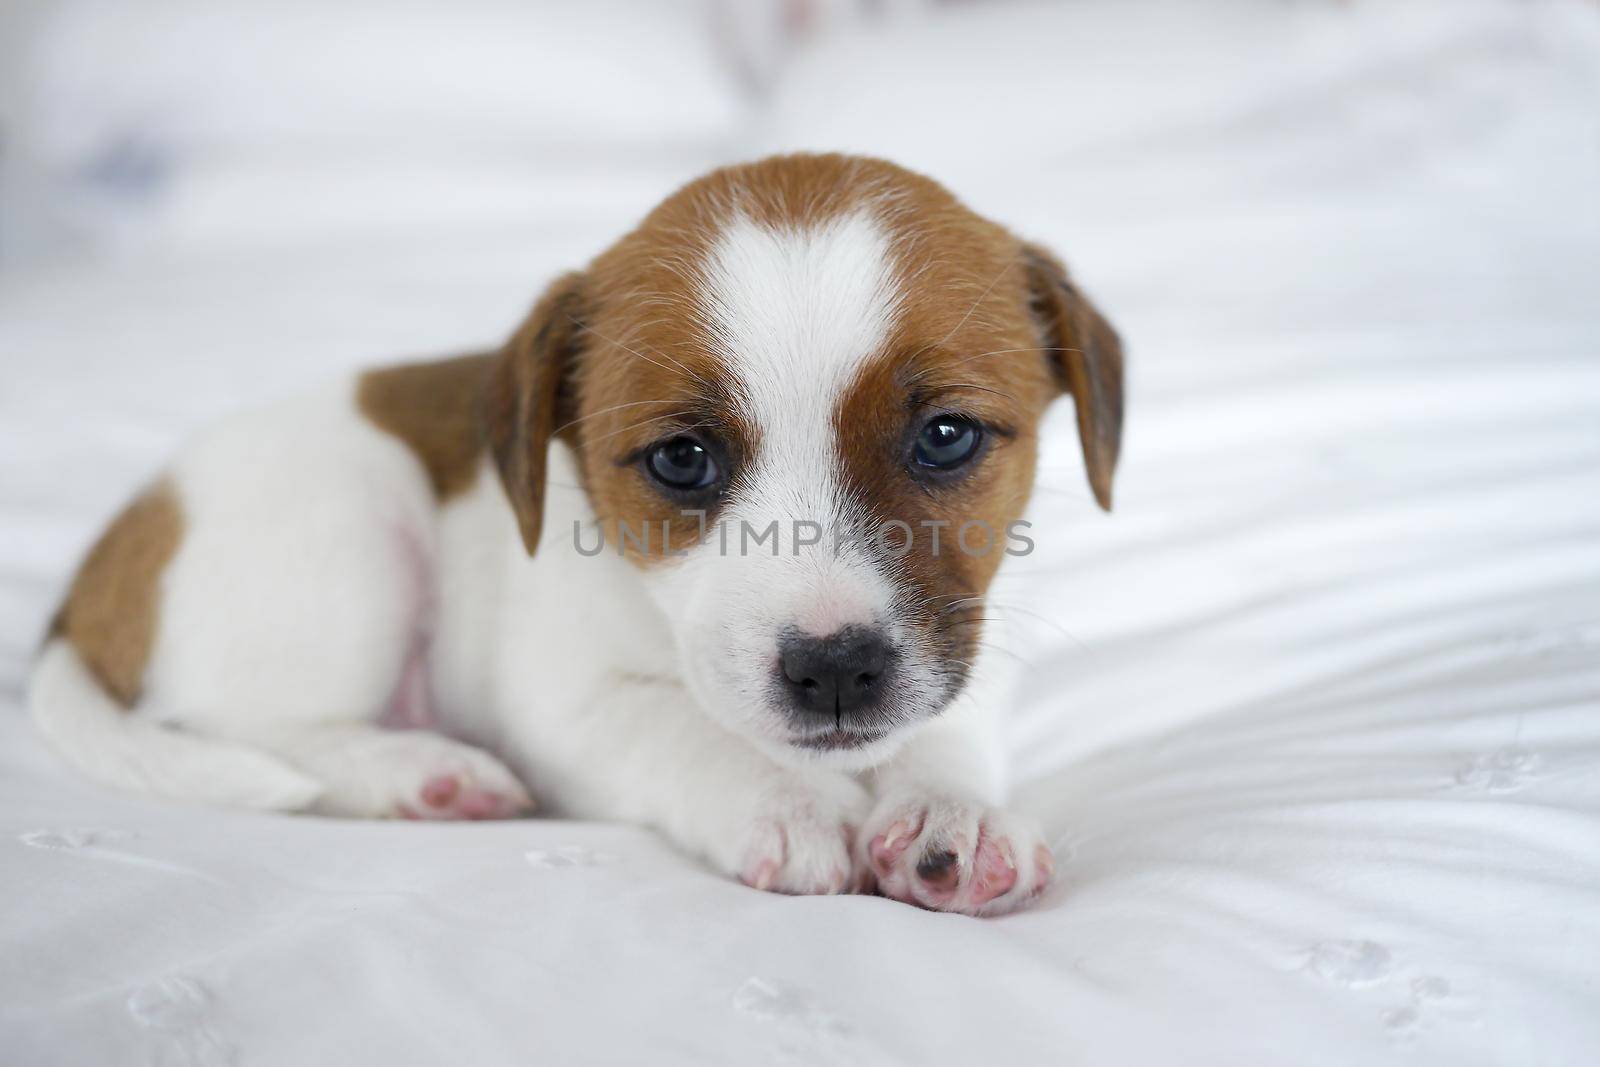 Cute JAck Russel puppy on a white bed by fivepointsix